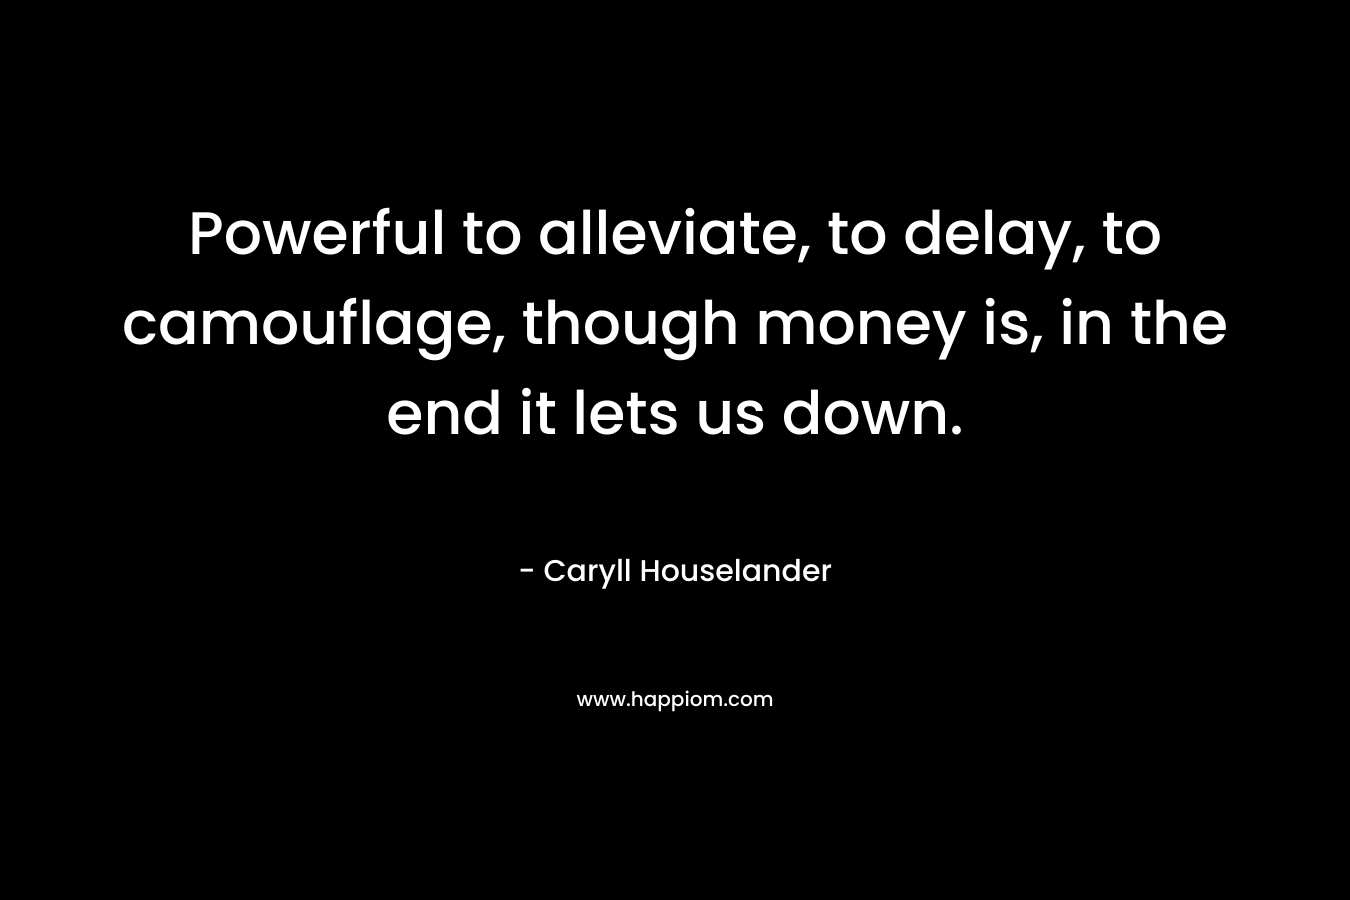 Powerful to alleviate, to delay, to camouflage, though money is, in the end it lets us down.